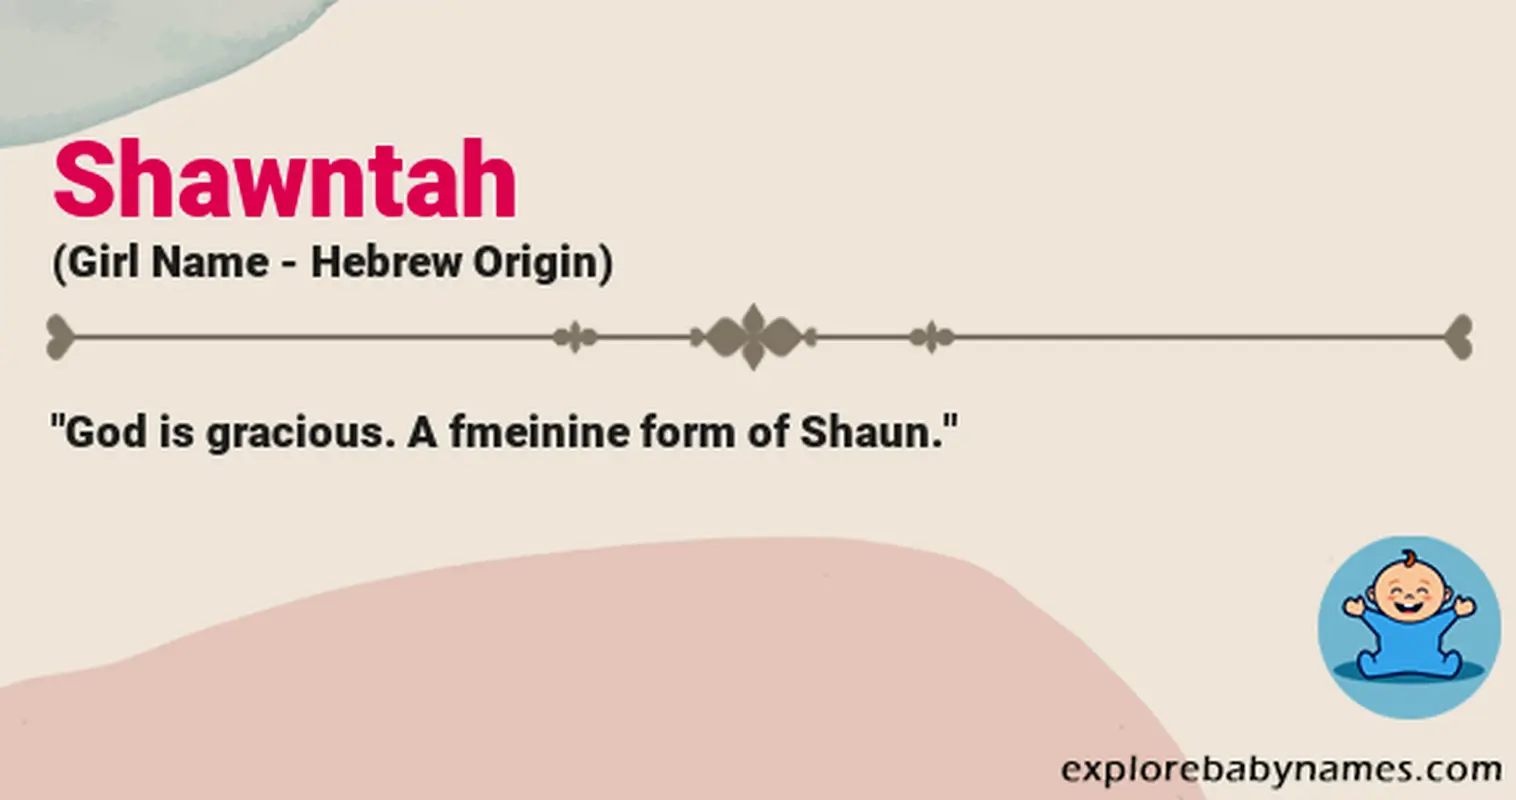 Meaning of Shawntah